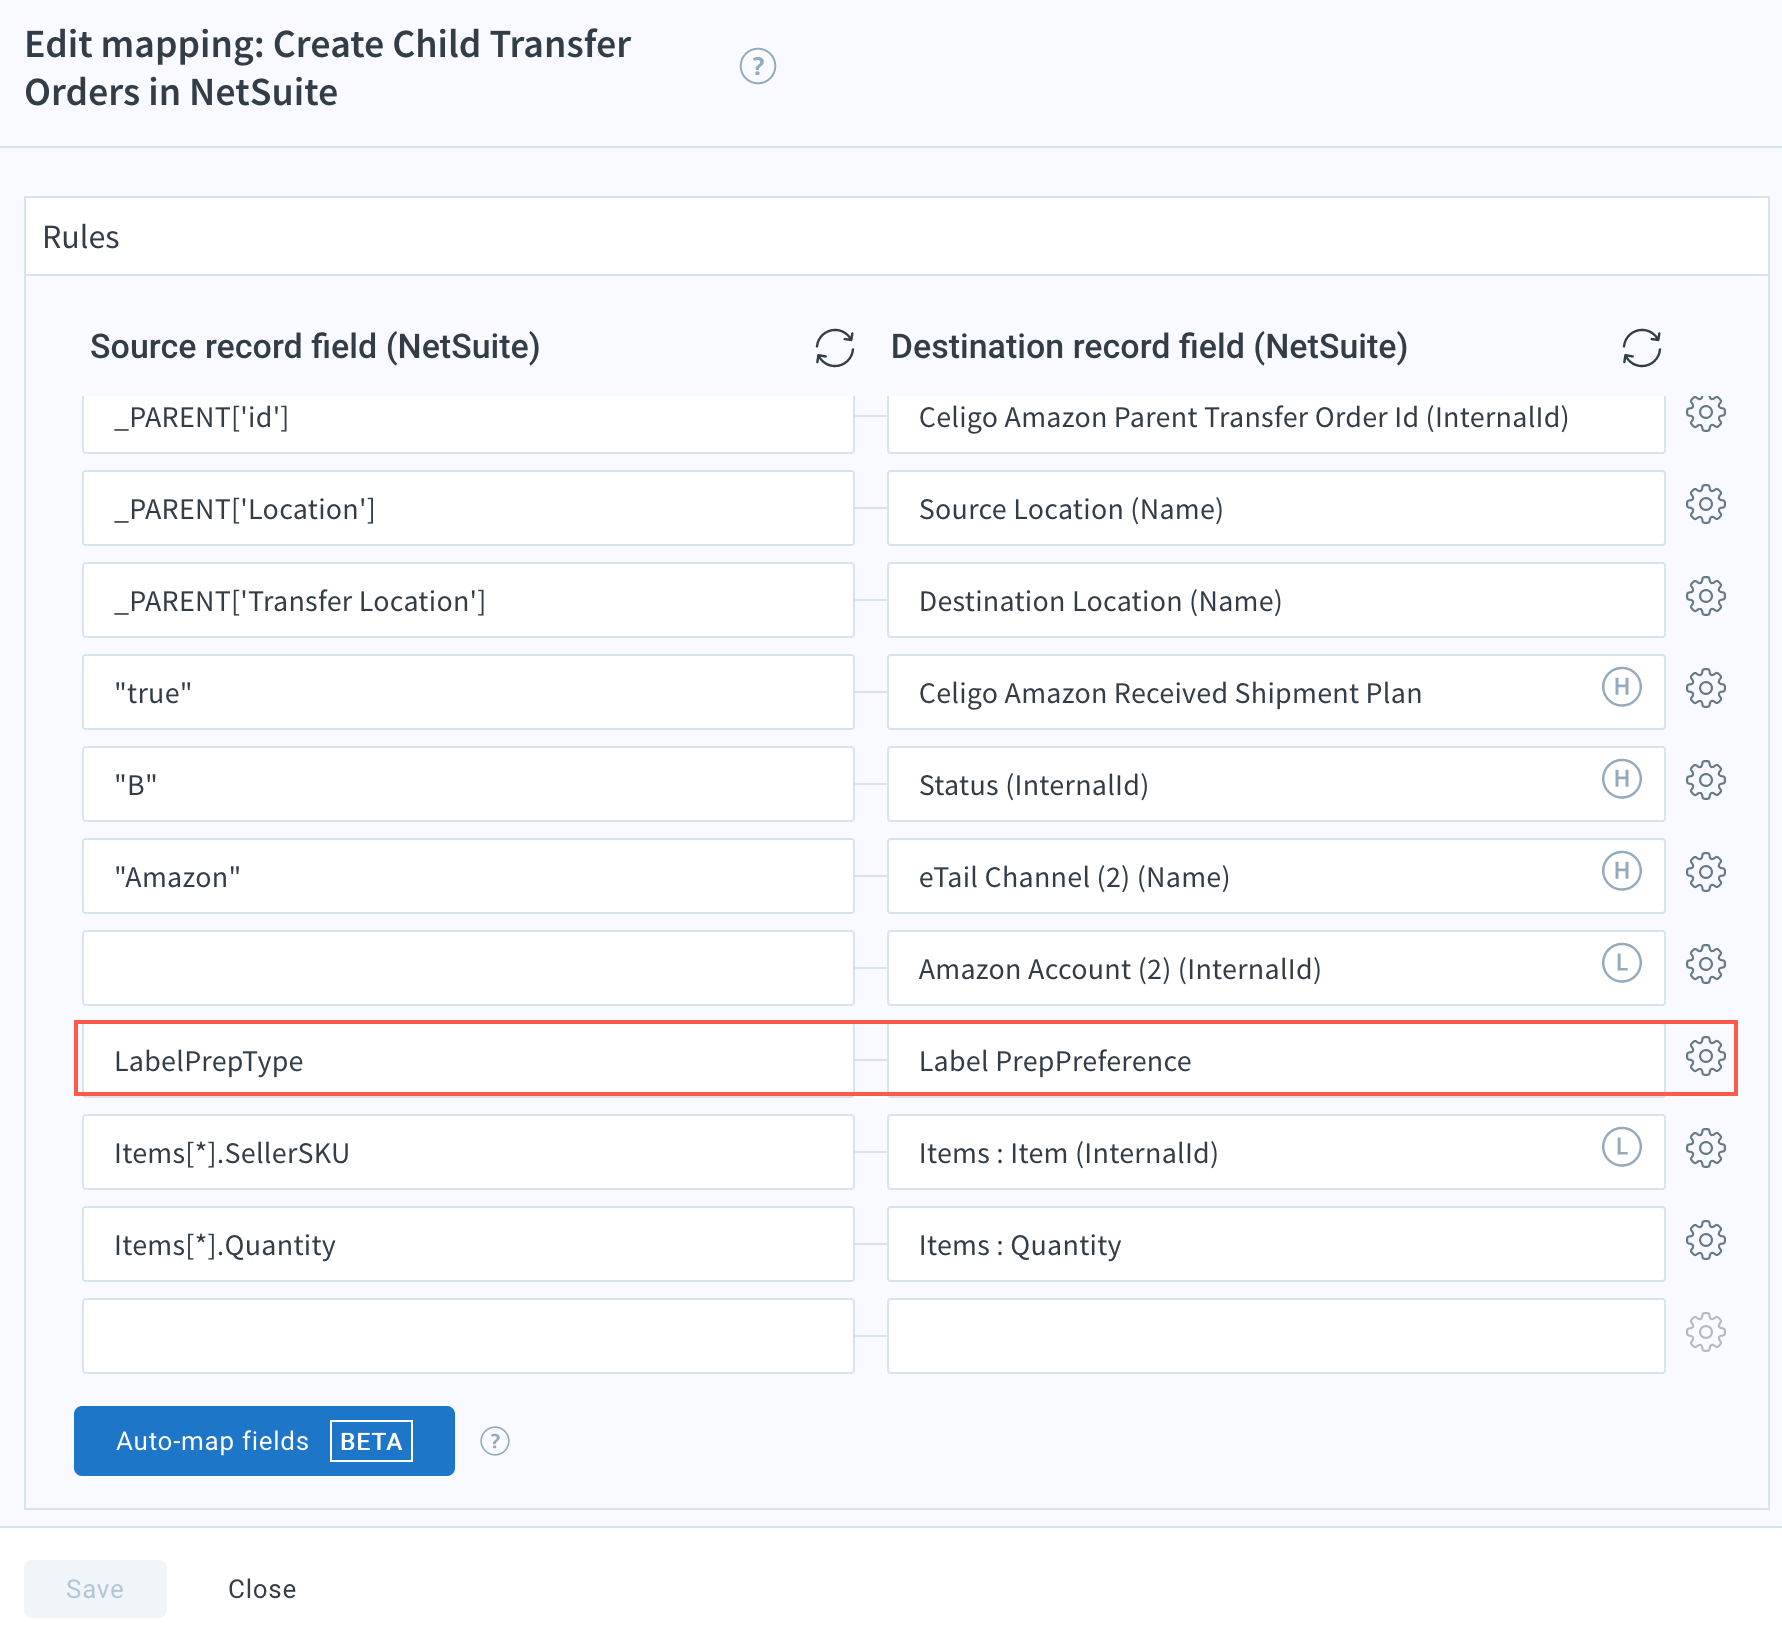 Edit mapping - Create Child Transfer Orders in NetSuite.png